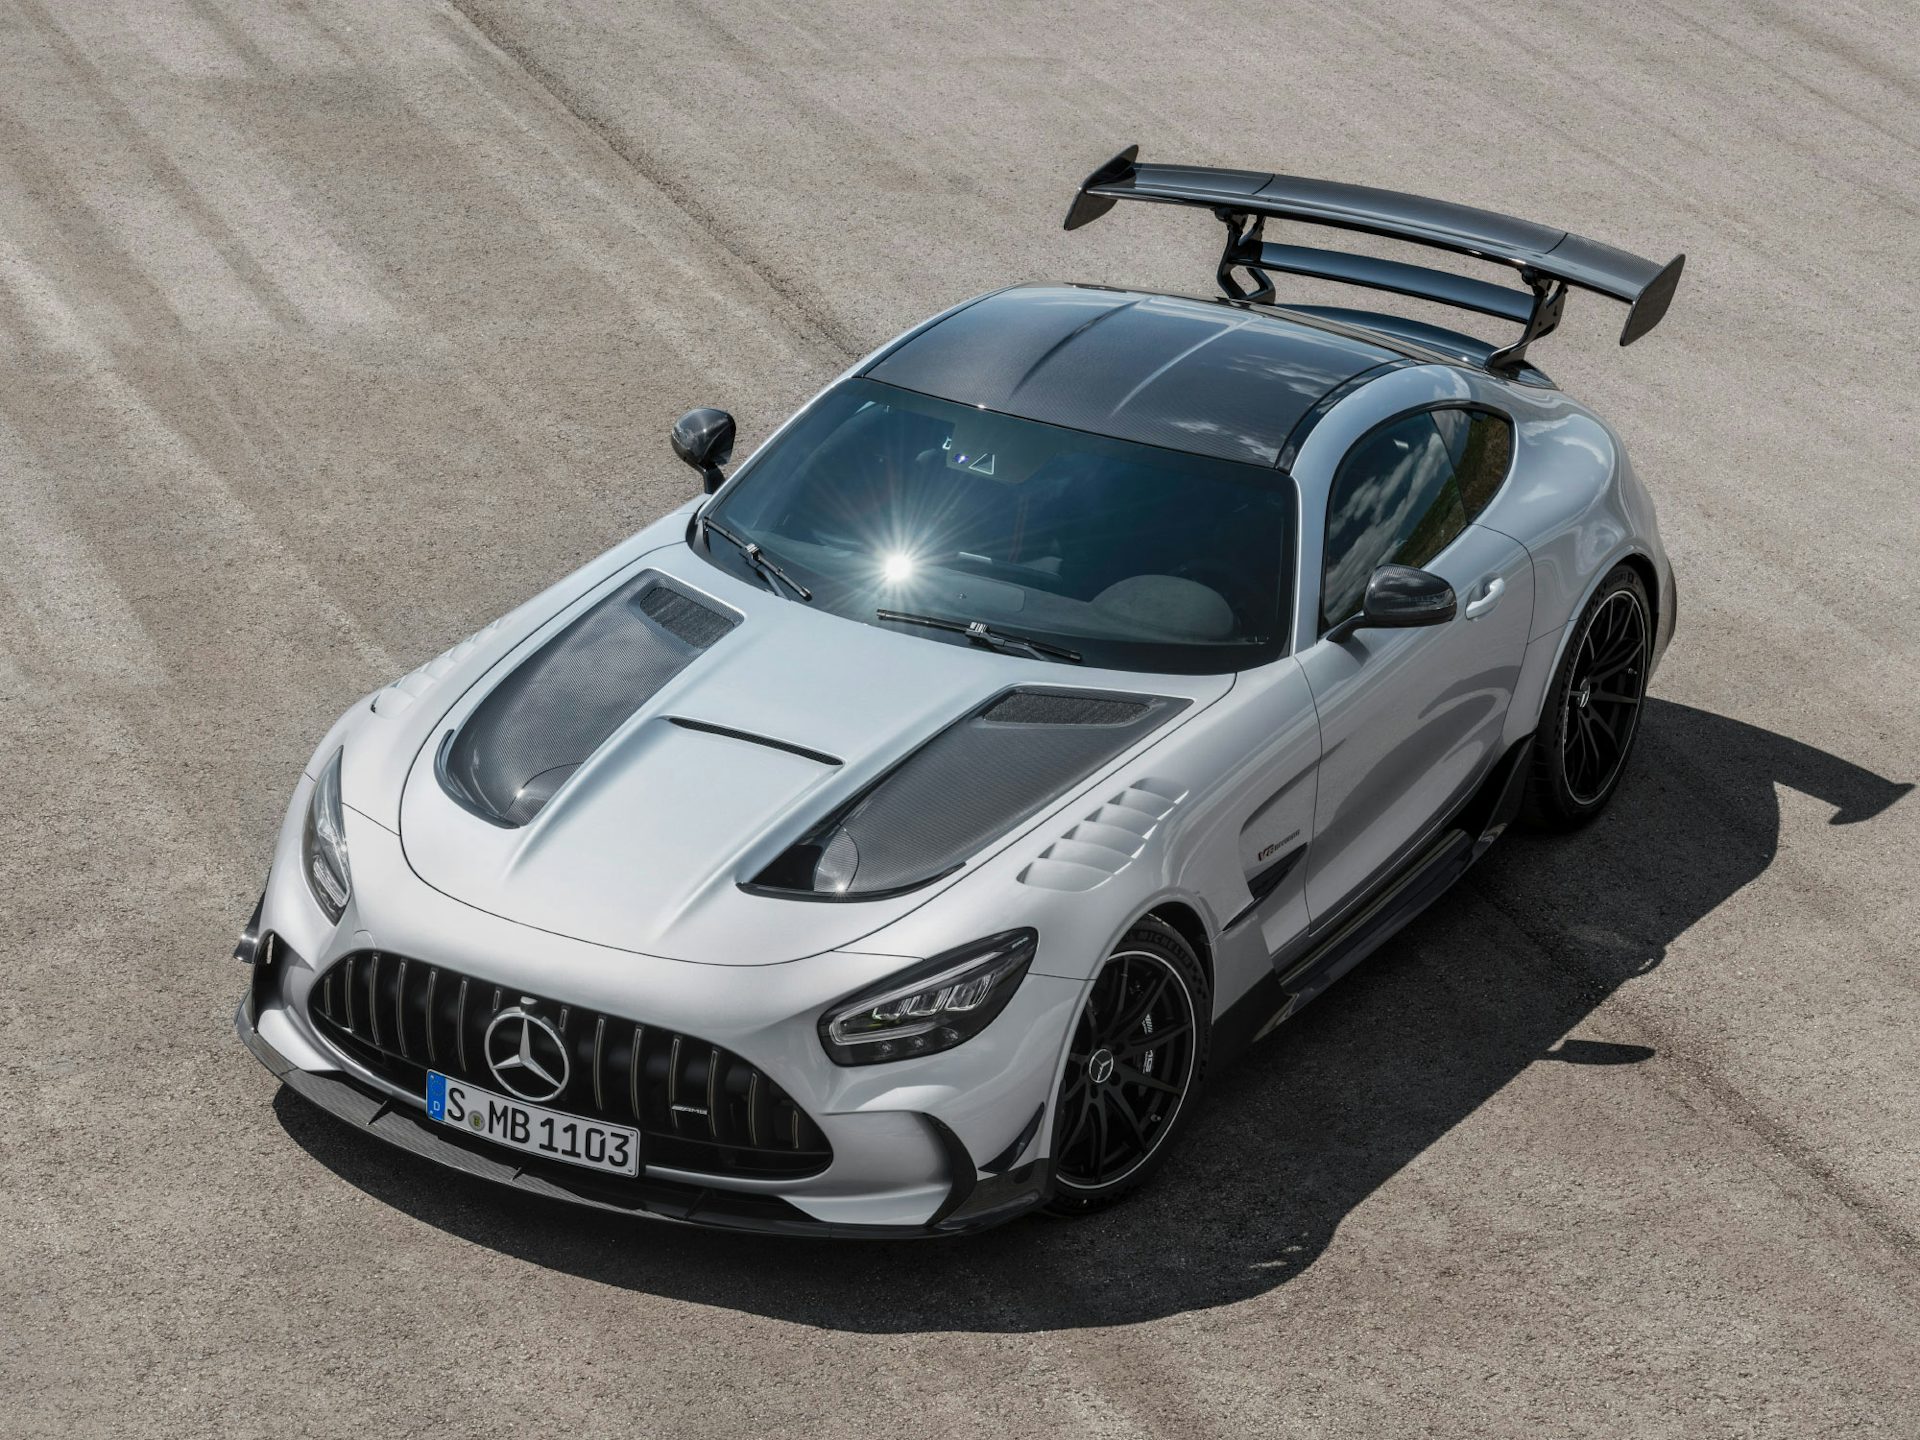 2021 MercedesAMG GT Black Series revealed price, specs and release